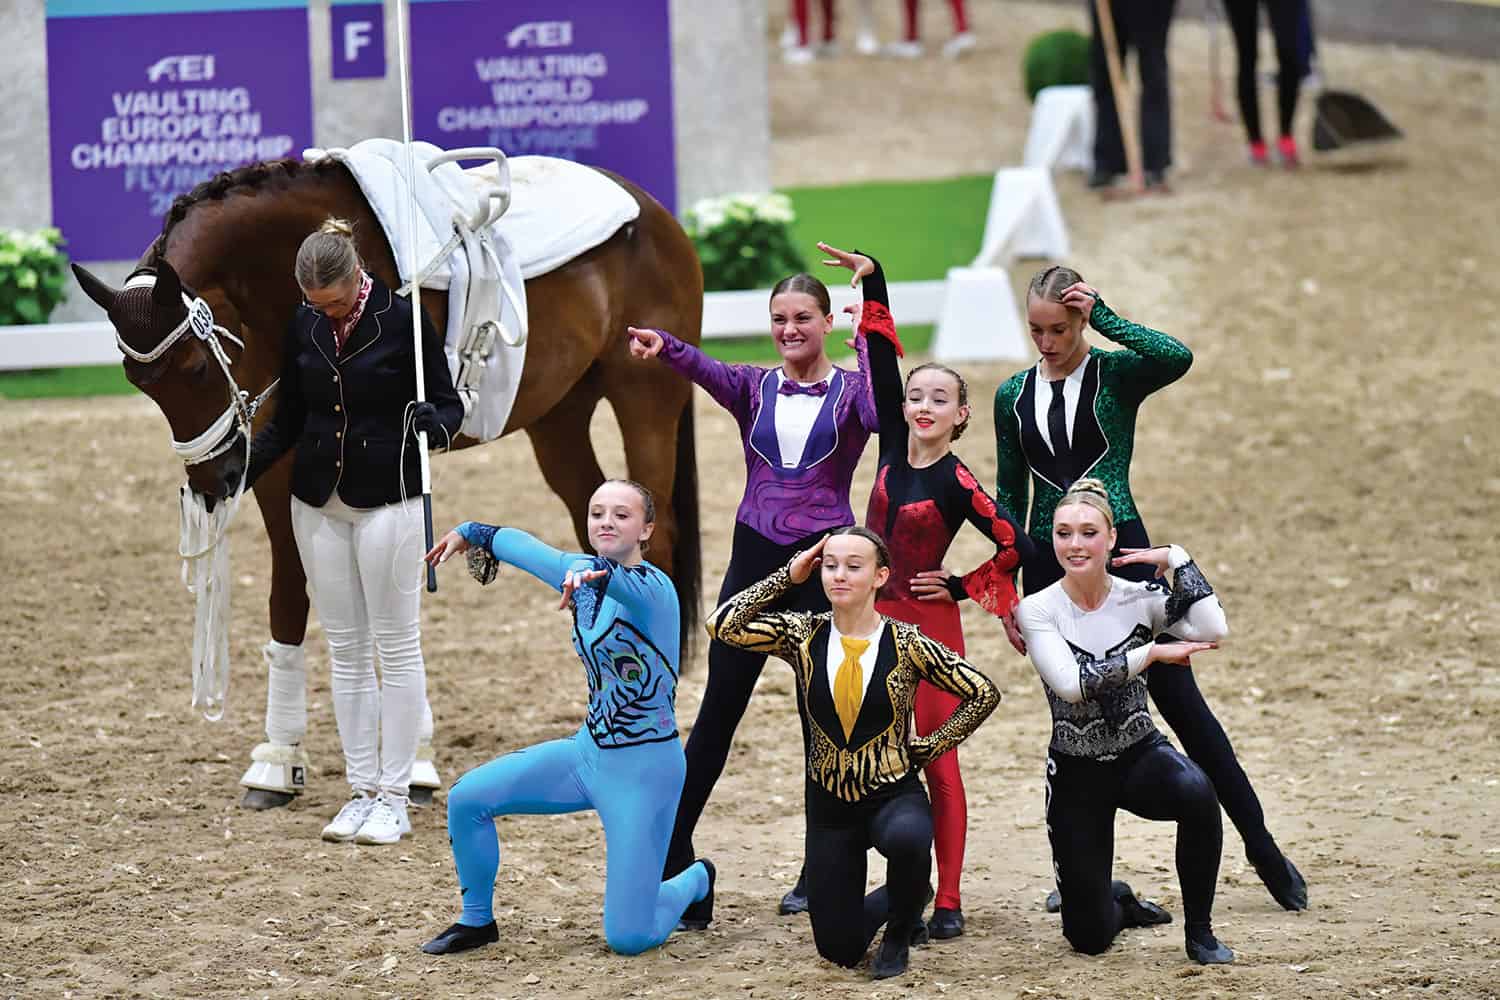 U.S. Junior Squad Wins Bronze Medal at 2023 FEI Vaulting World Championships for Young Vaulters and Juniors